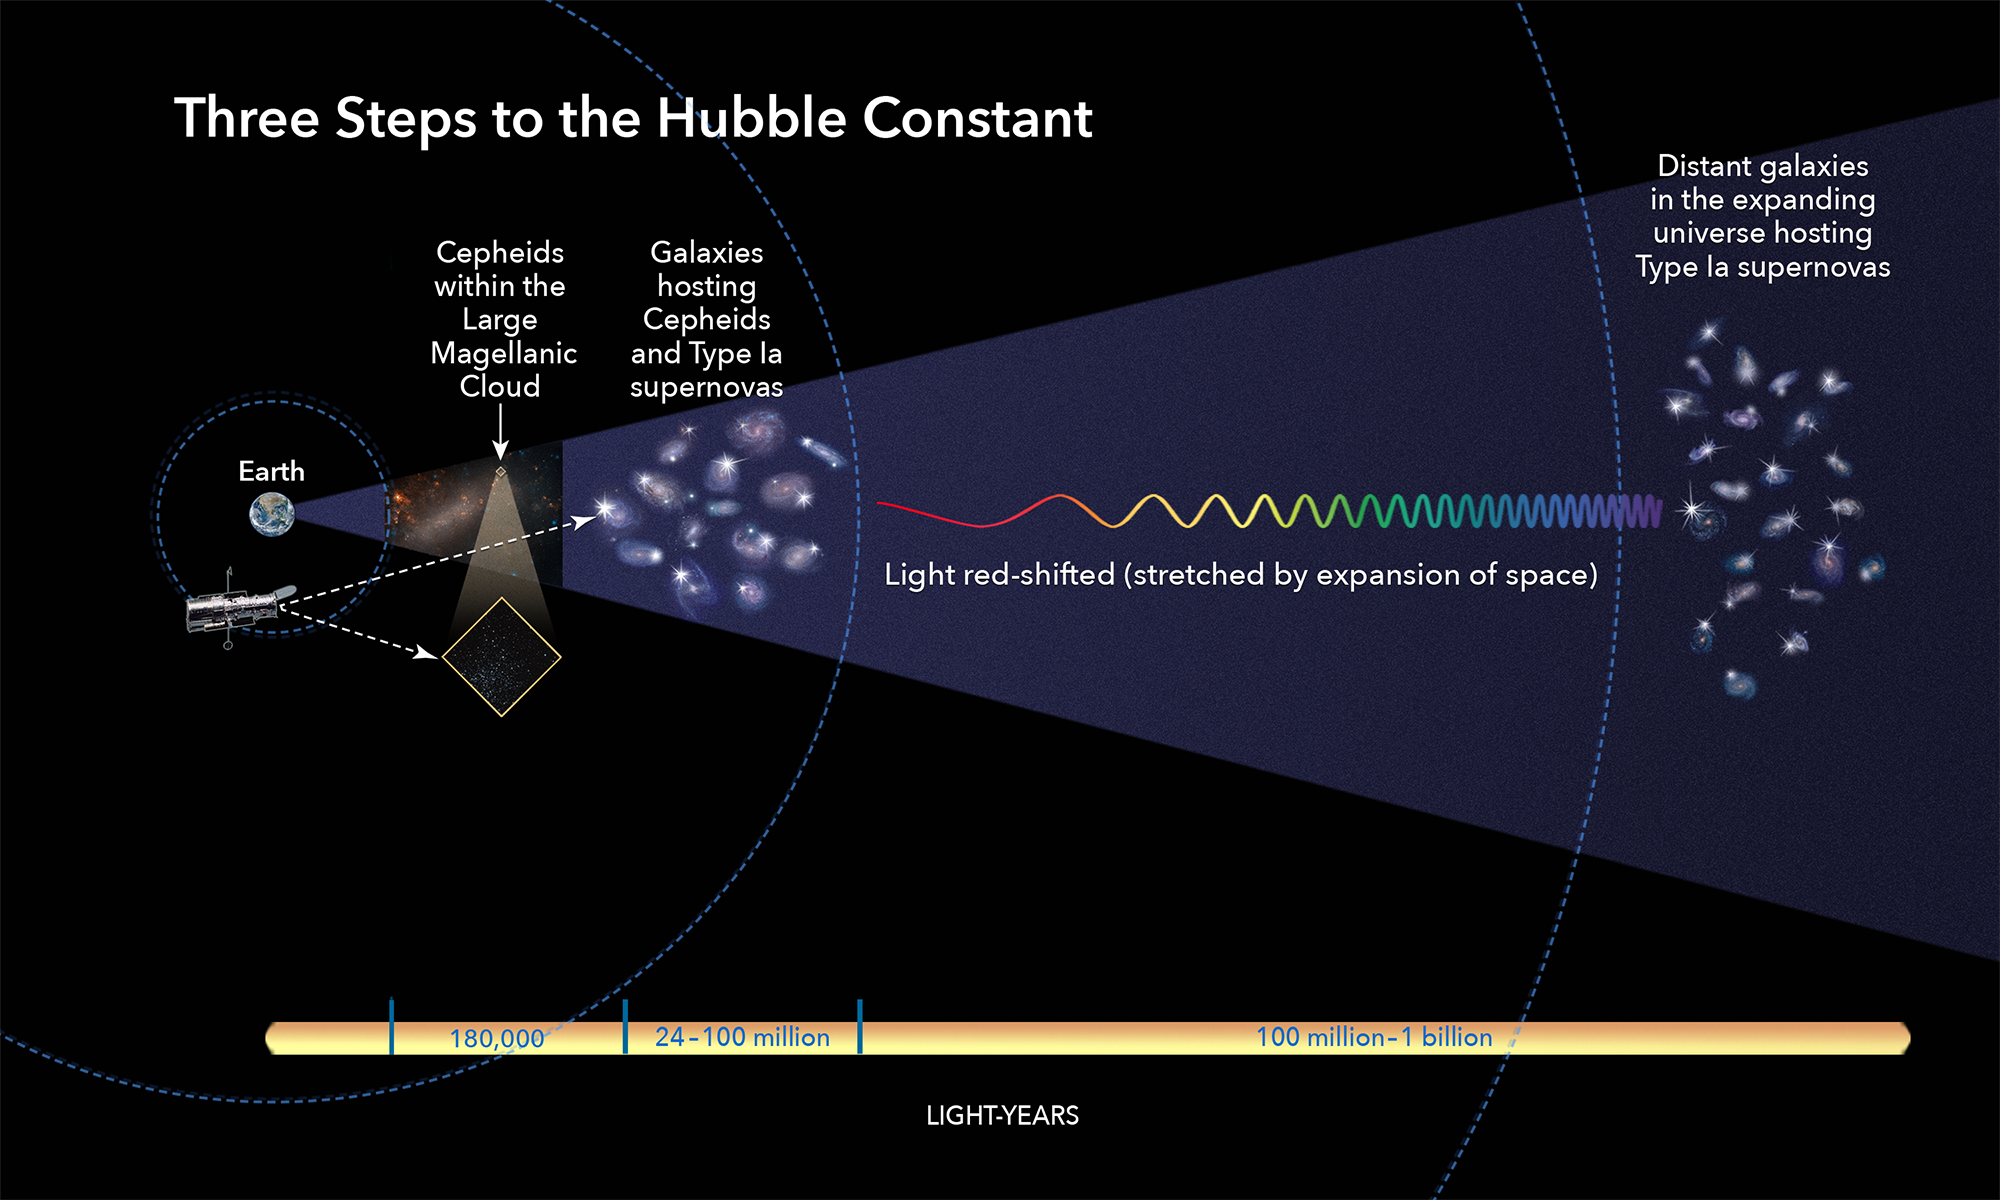 infographic showing calculation of universe's expansion rate